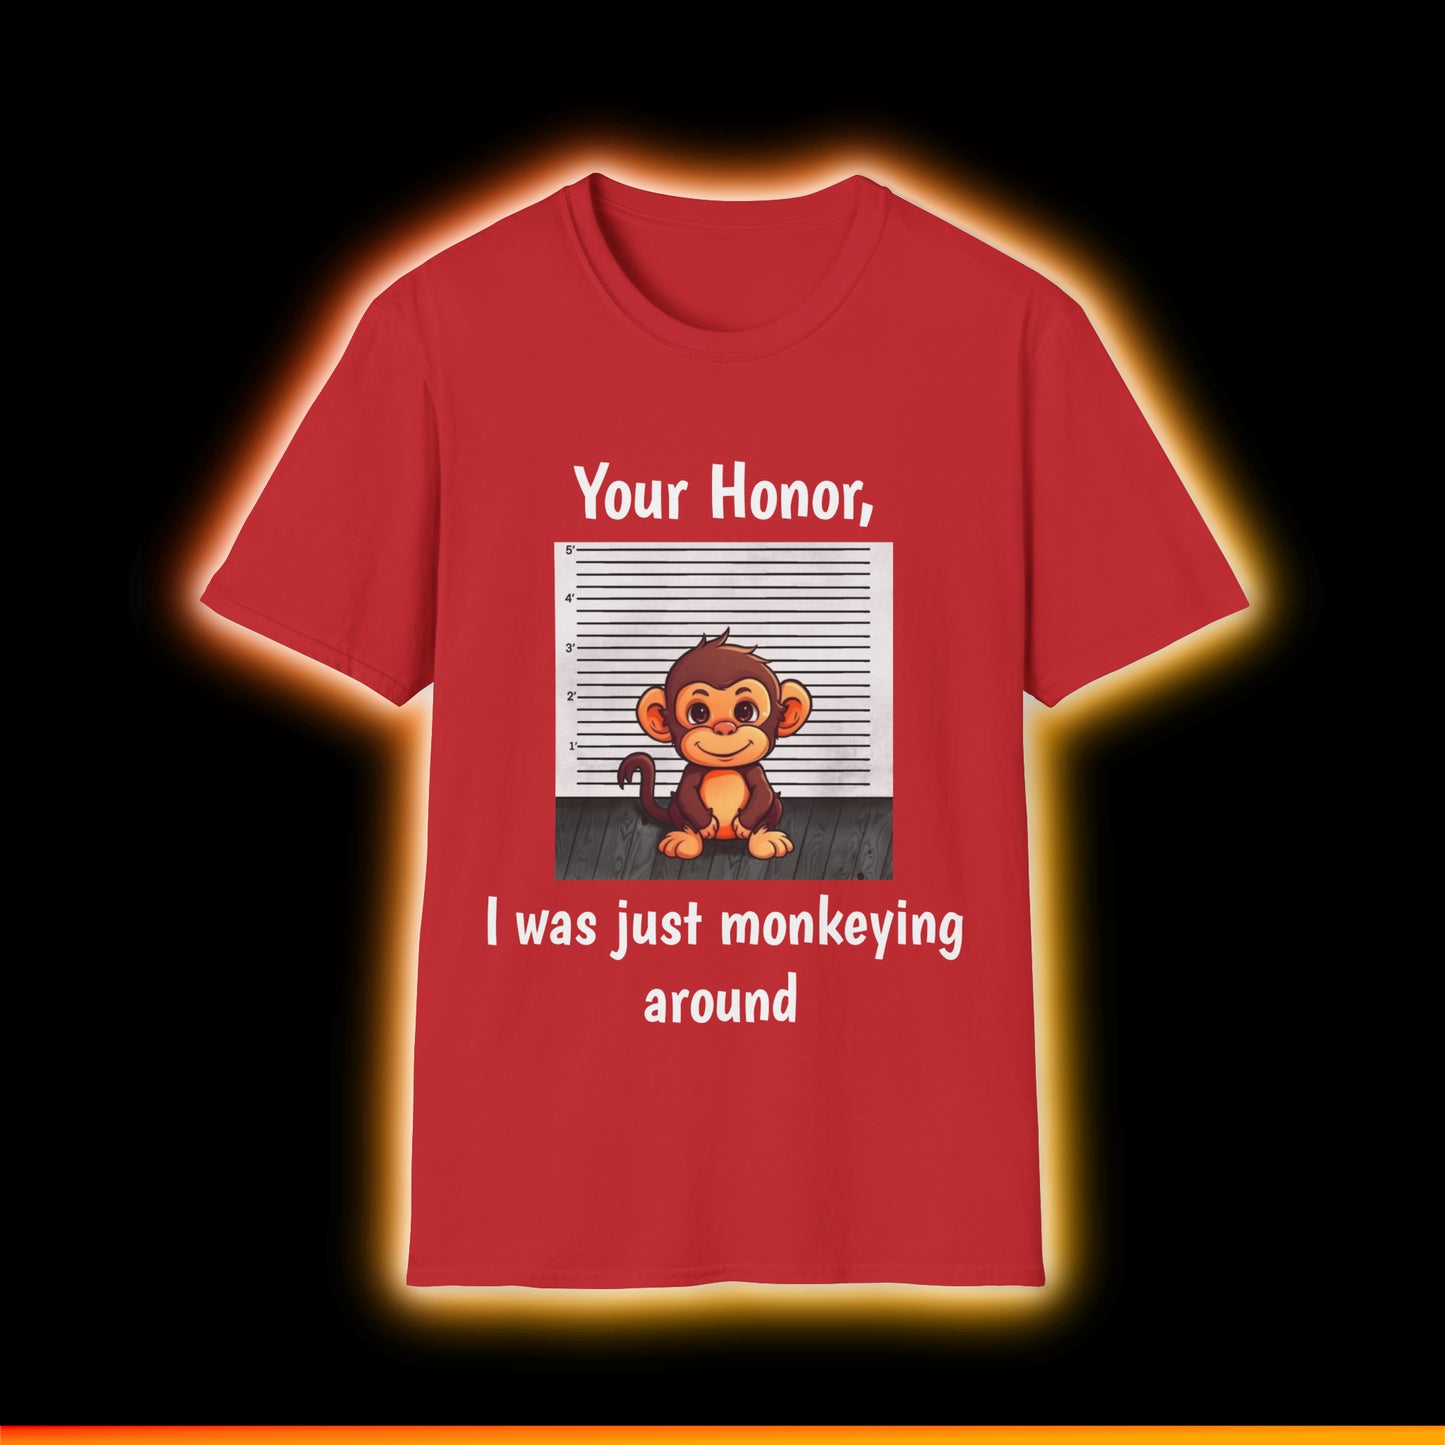 Your Honor, I Was Just Monkeying Around